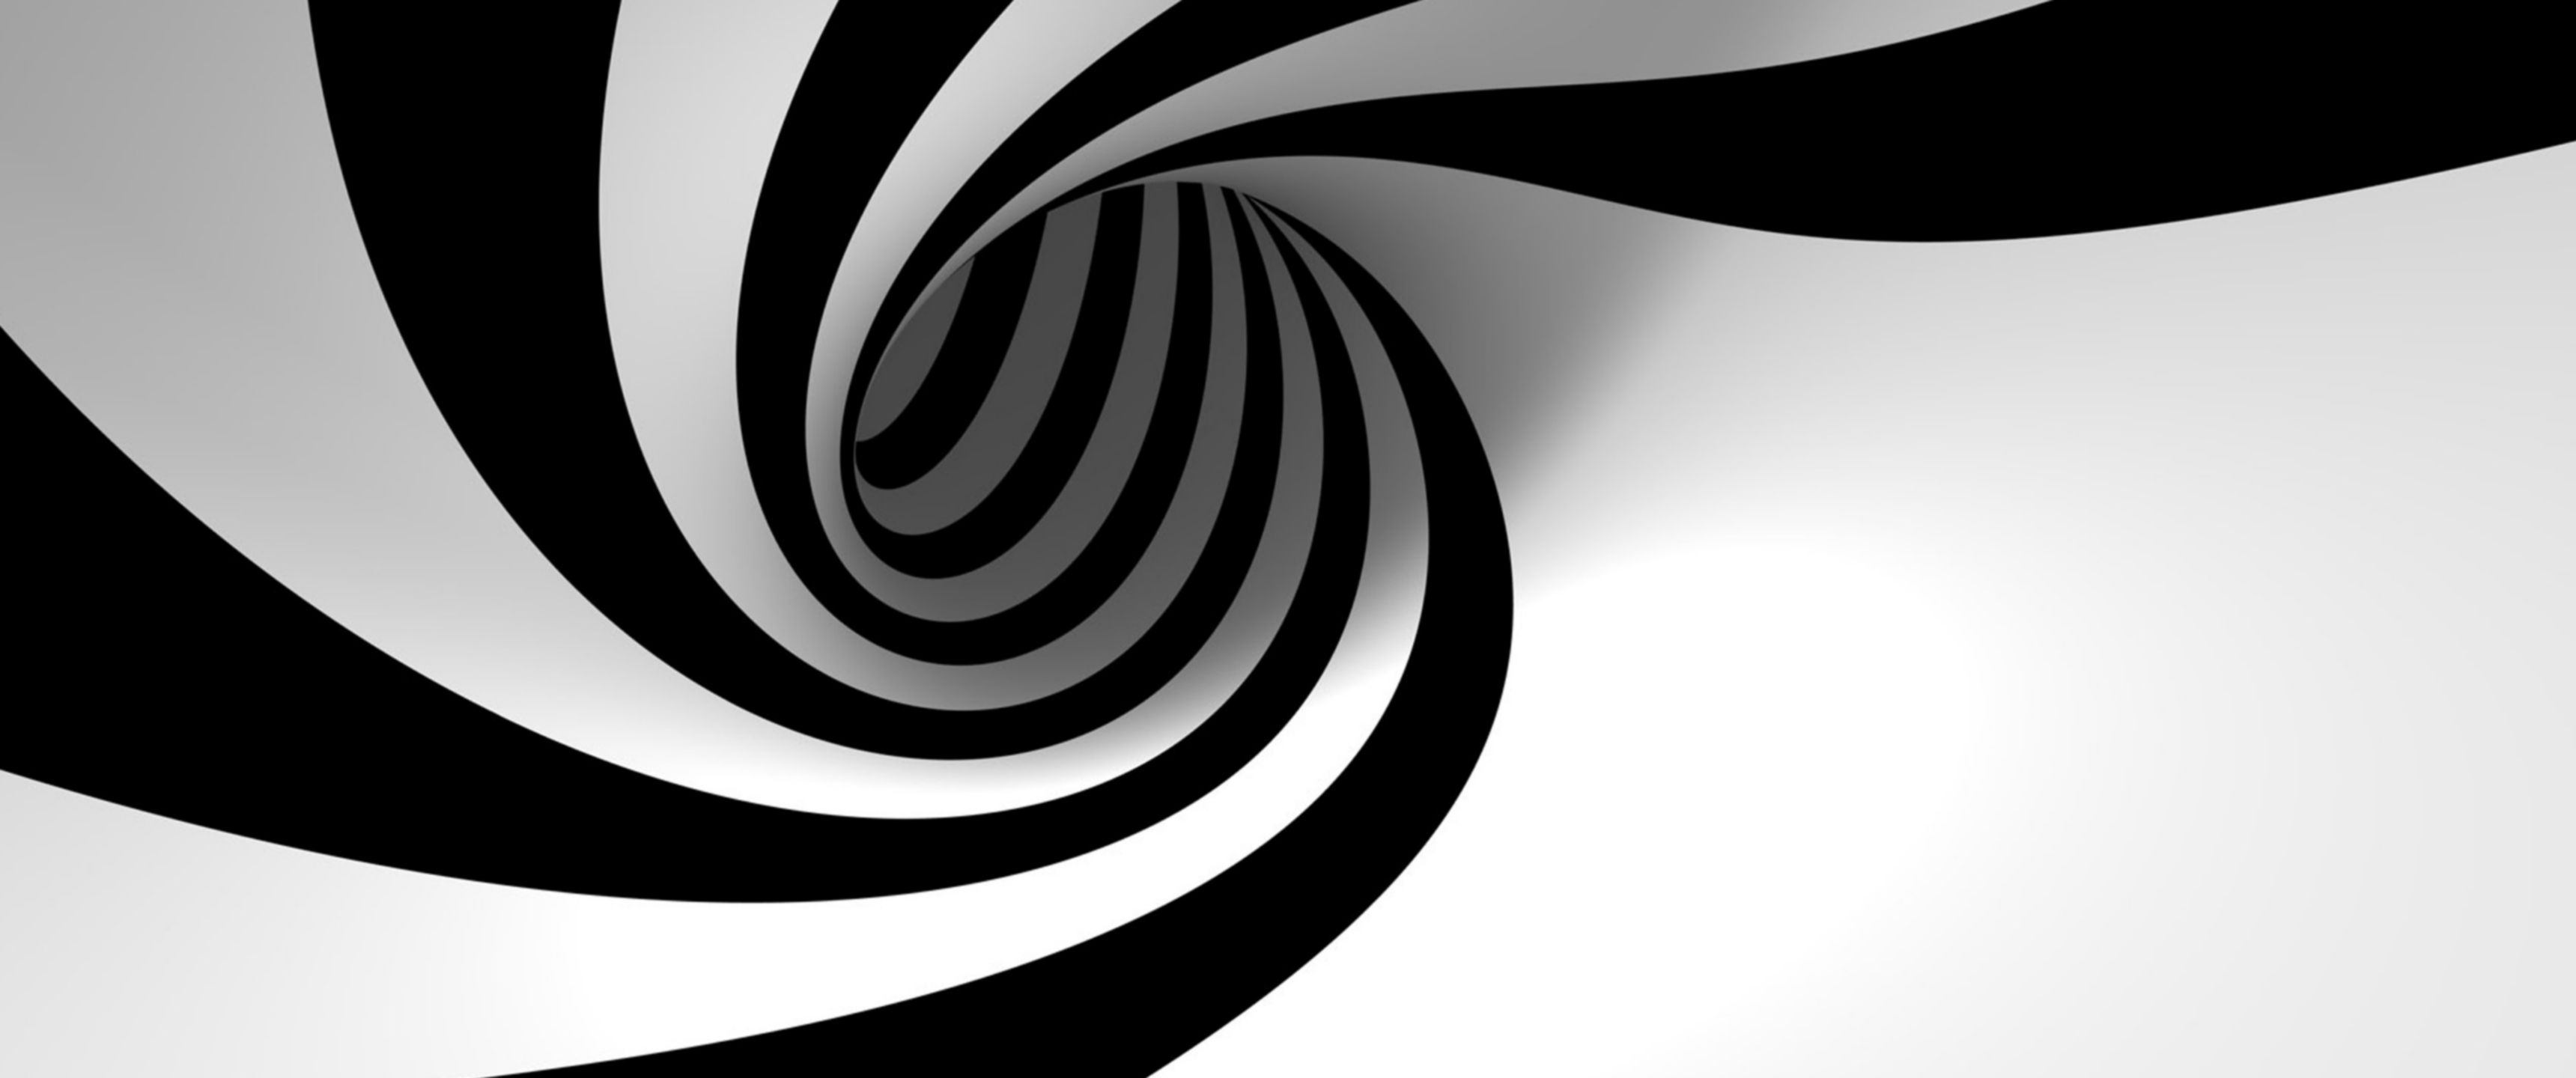 A black and white spiral pattern on the wall - 3440x1440